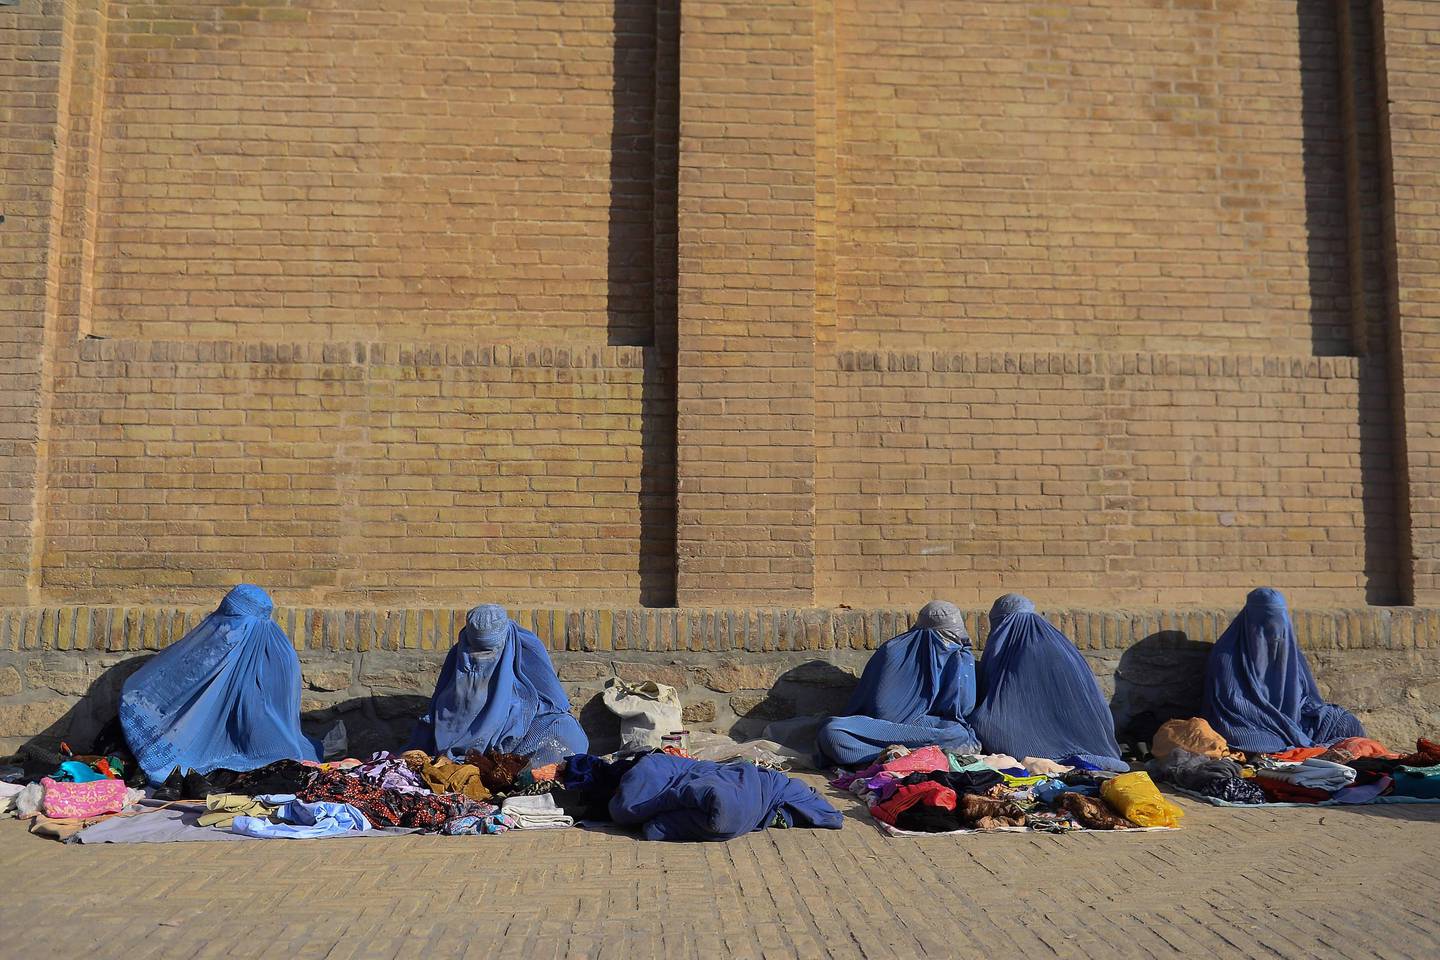 TOPSHOT - Women wearing burqas wait for customers as they sell clothes on a roadside in Herat on October 22, 2019. (Photo by HOSHANG HASHIMI / AFP)